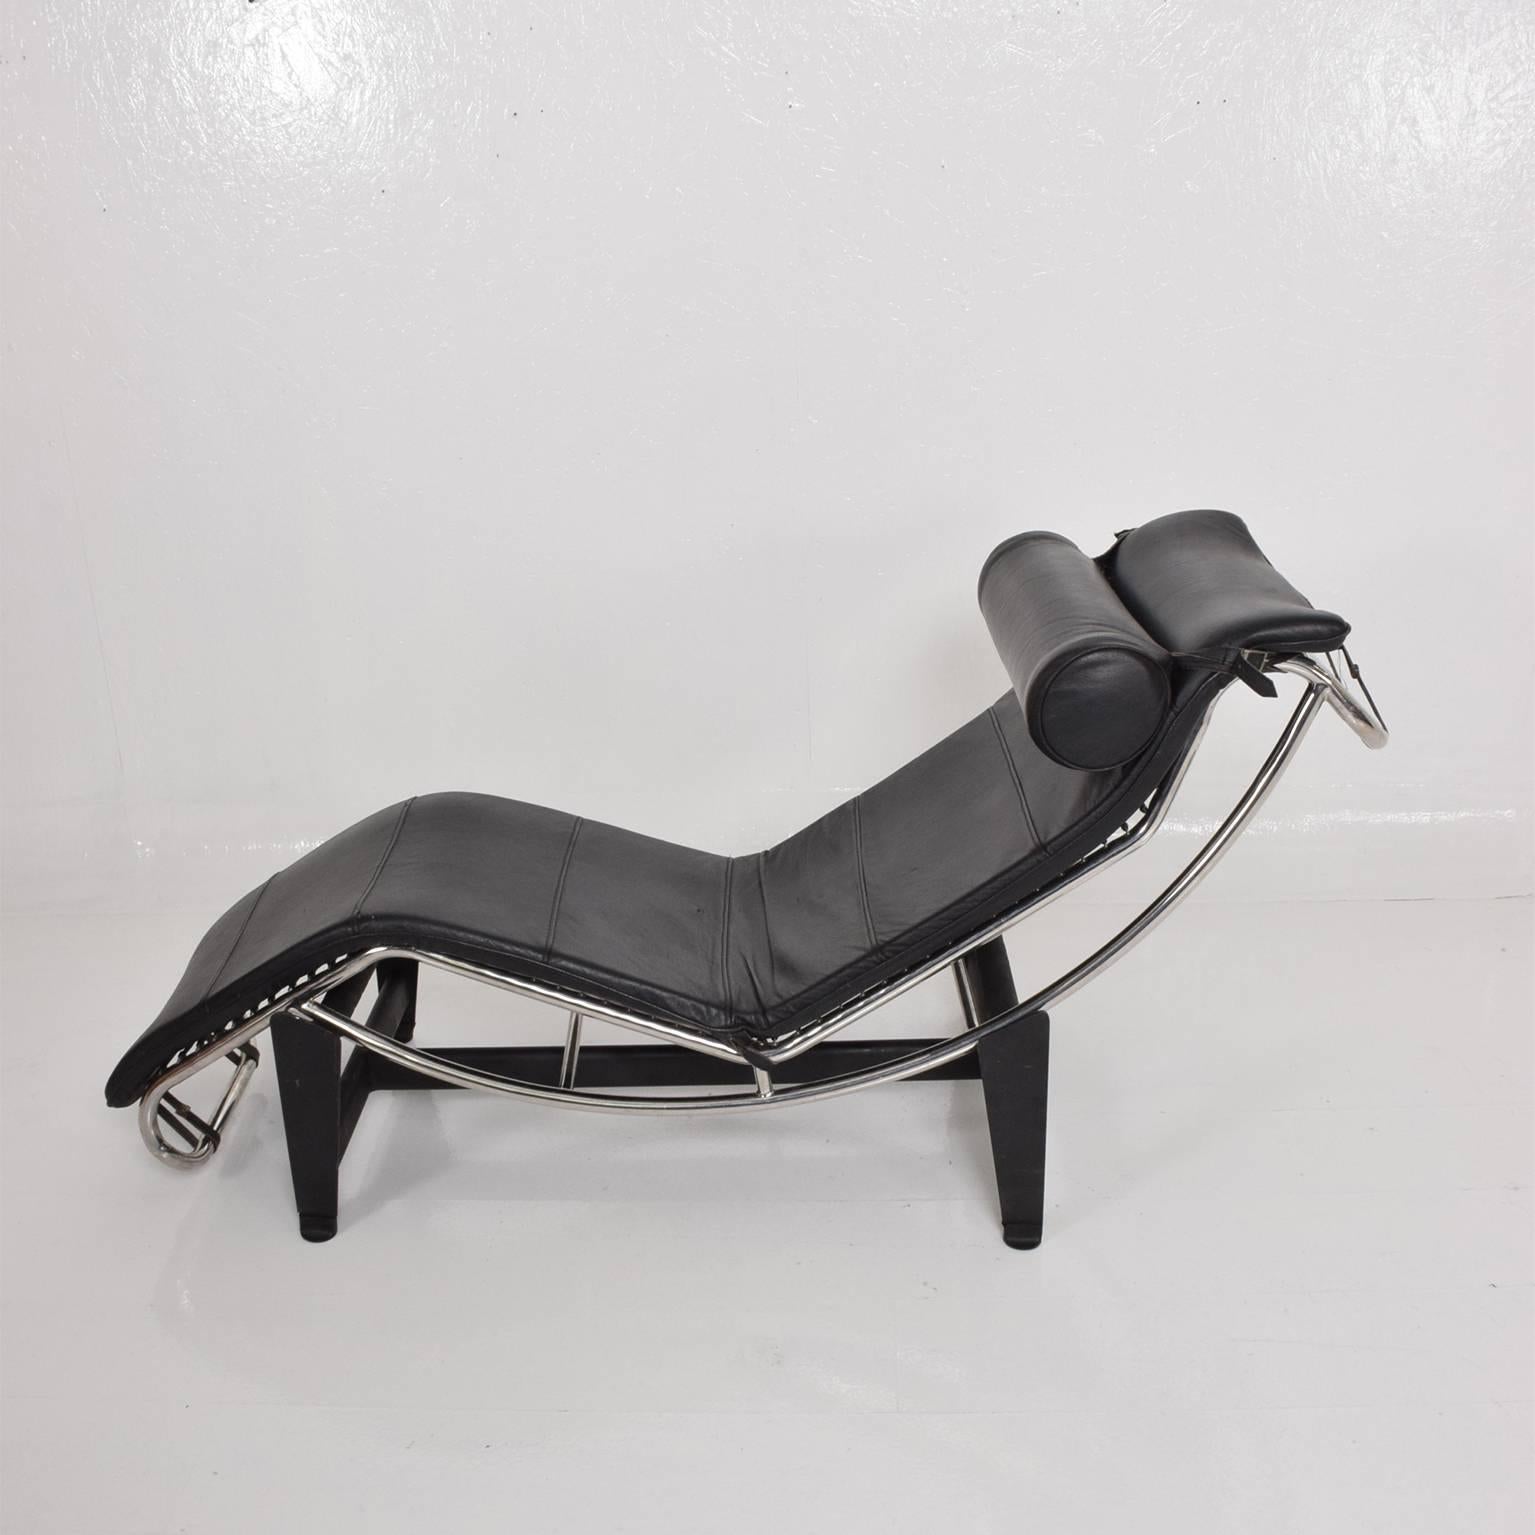 For your consideration a lounge chaise chair Designed by Le Corbusier.
Black leather with chrome base. 
Unmarked. No label present from the maker.
Dimensions: 29